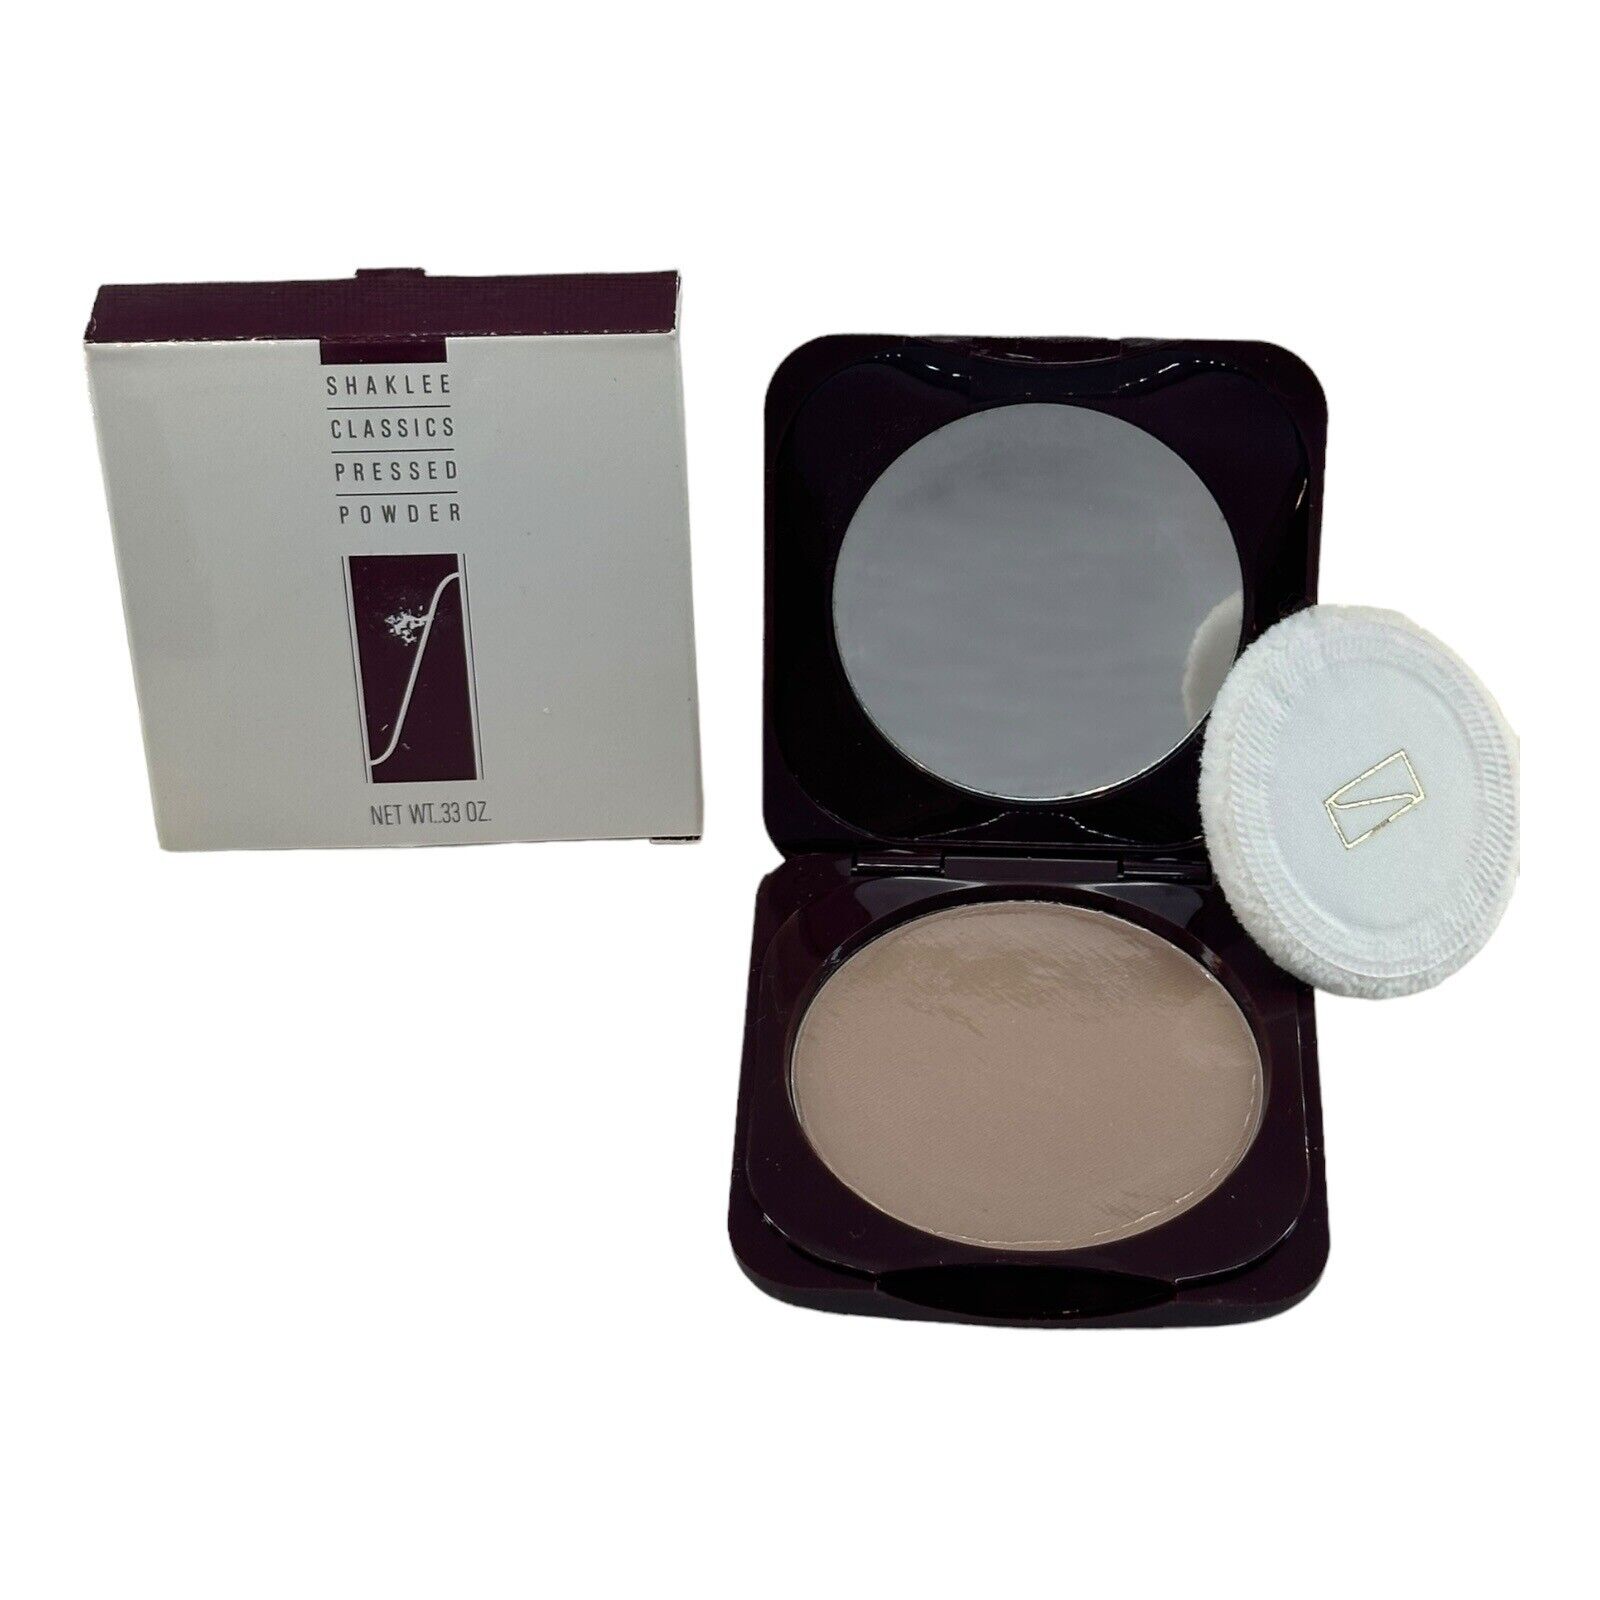 Shaklee Classics Pressed Powder 0.33 oz BUFF 32121 New Collectible Makeup VTG